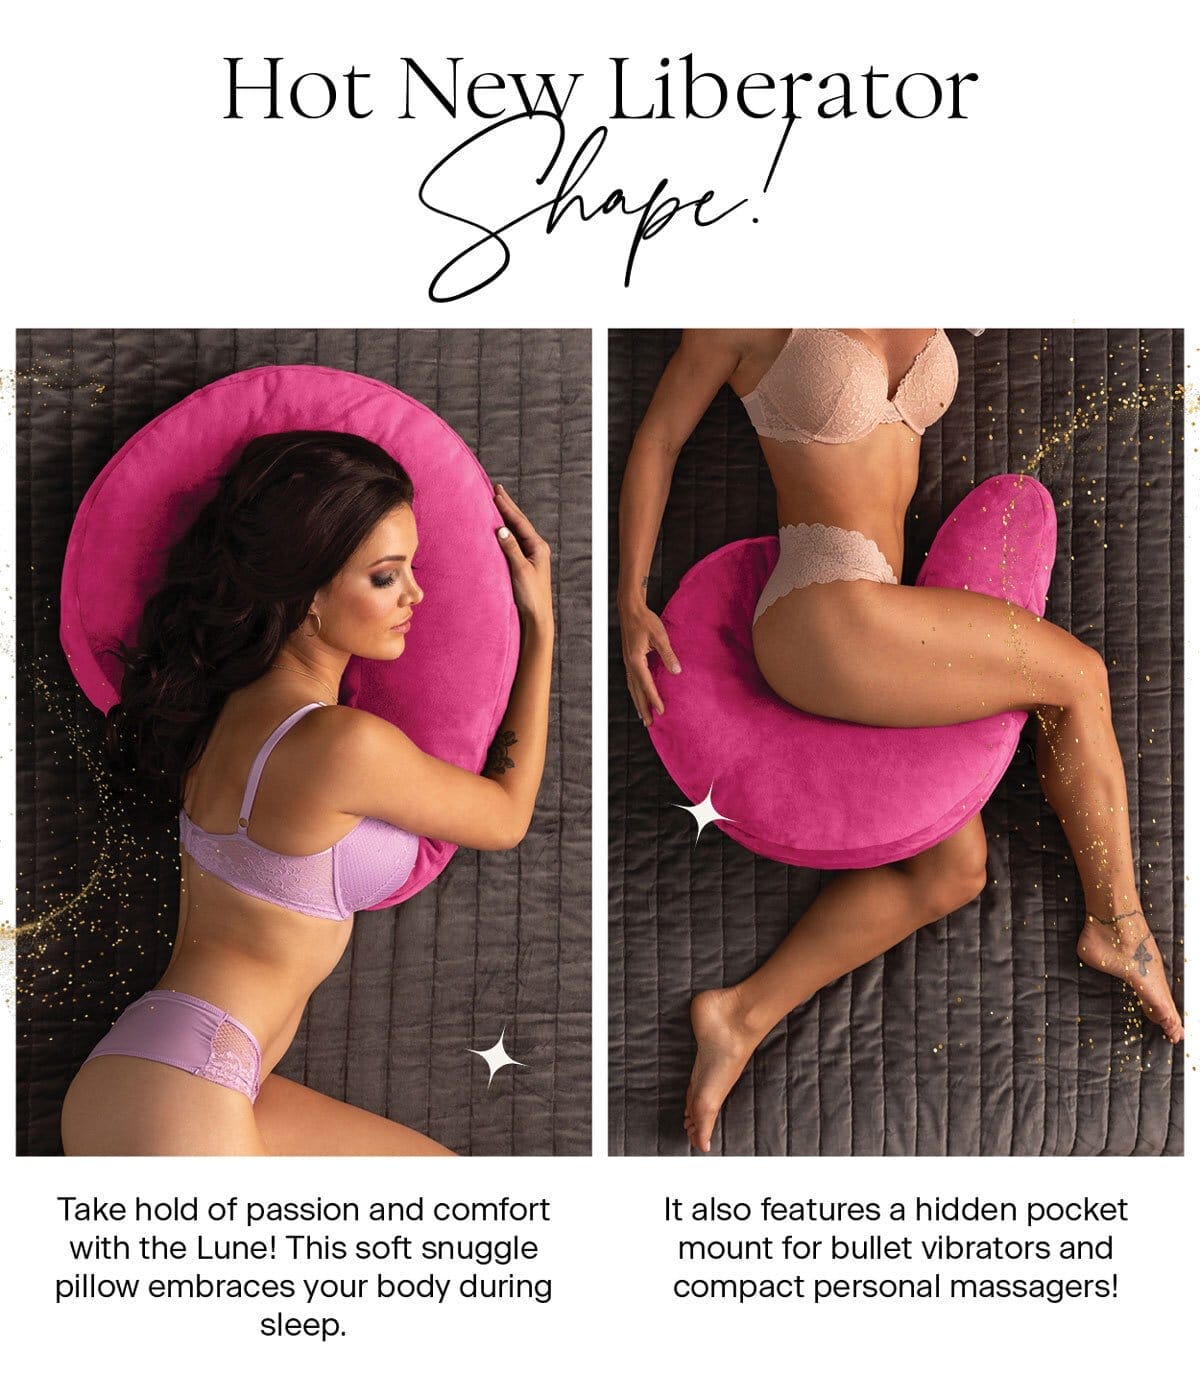 HOT NEW LIBERATOR SHAPE!\xa0 Take hold of passion and comfort with the Lune! Not only is it a soft snuggle pillow that embraces your body during sleep, but it also features a hidden pocket mount for bullet vibrators and compact personal massagers!